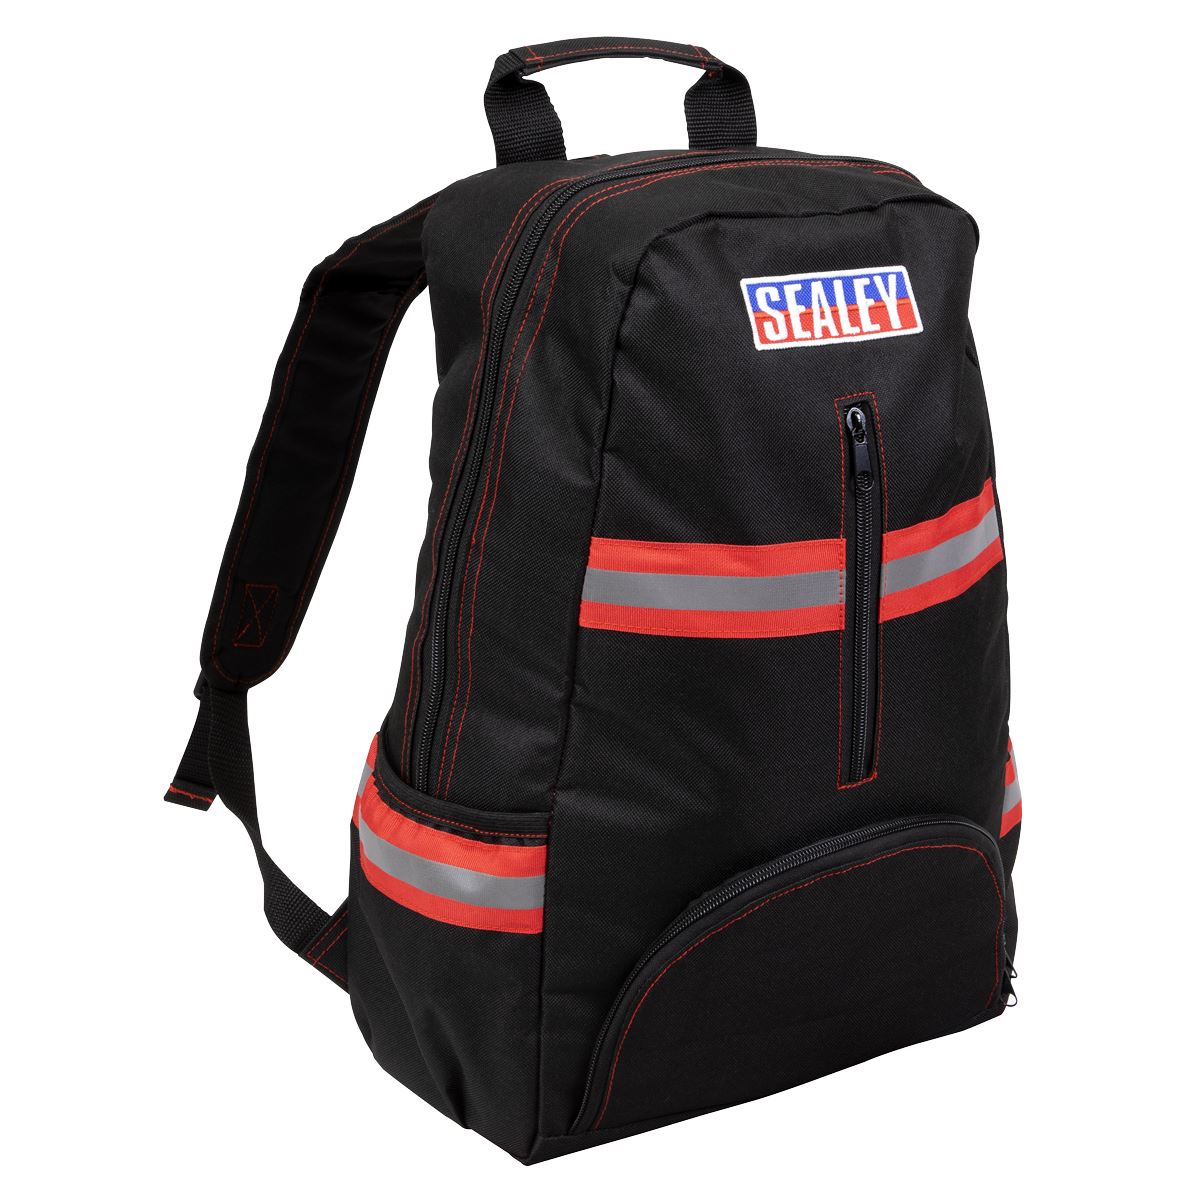 Sealey Backpack with Reflective Strips 430mm